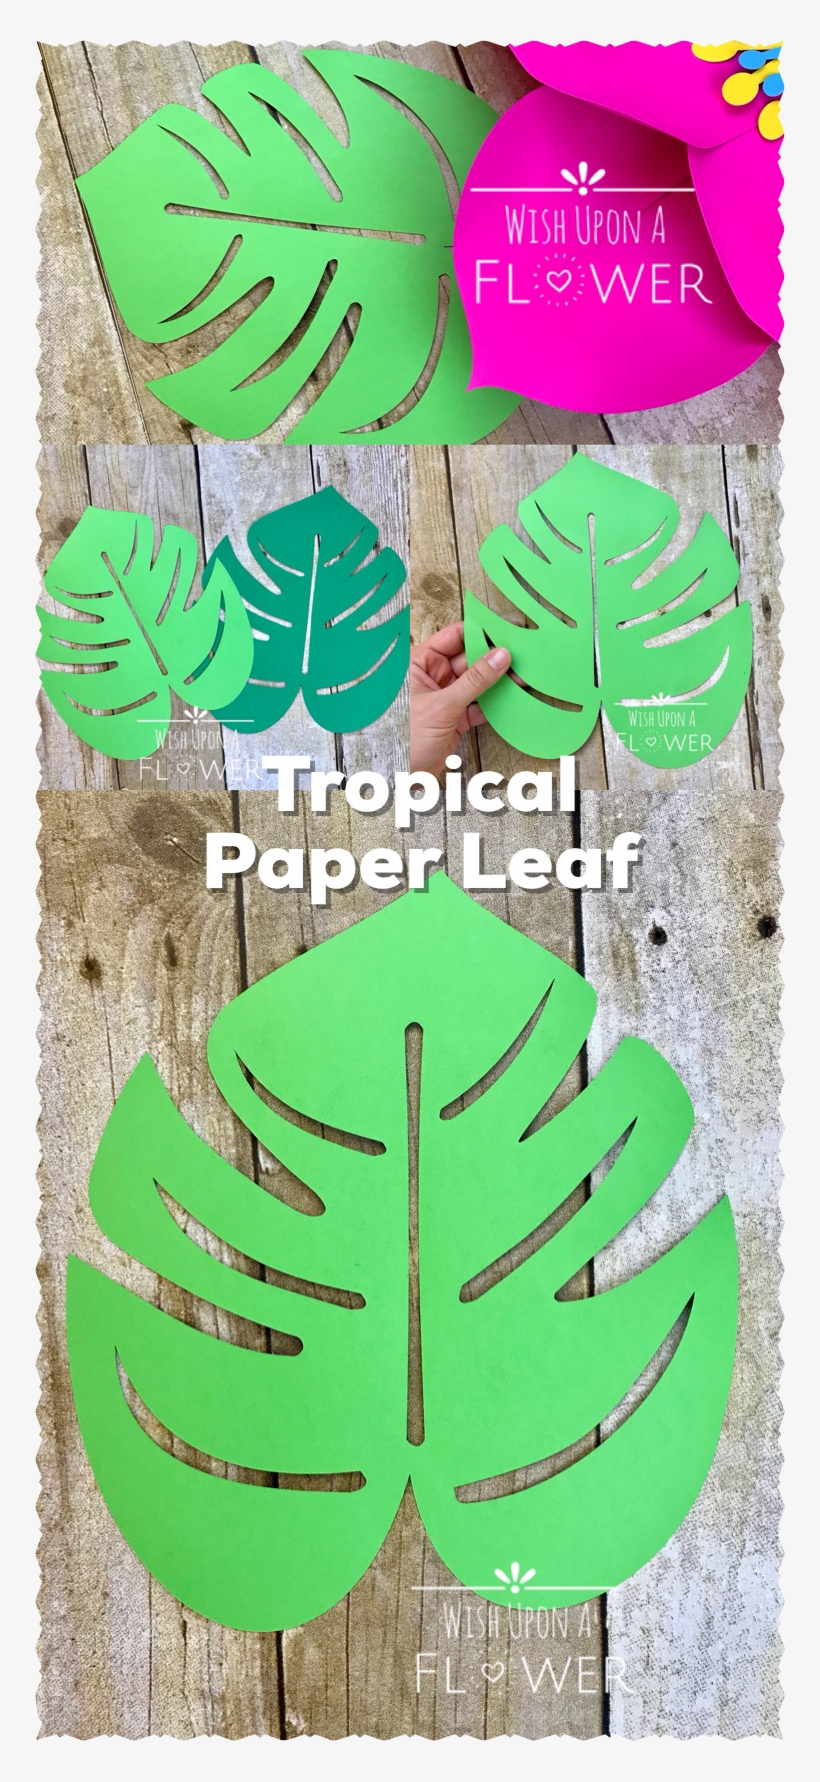 Paper Flower Leaf Template from www.pngkey.com